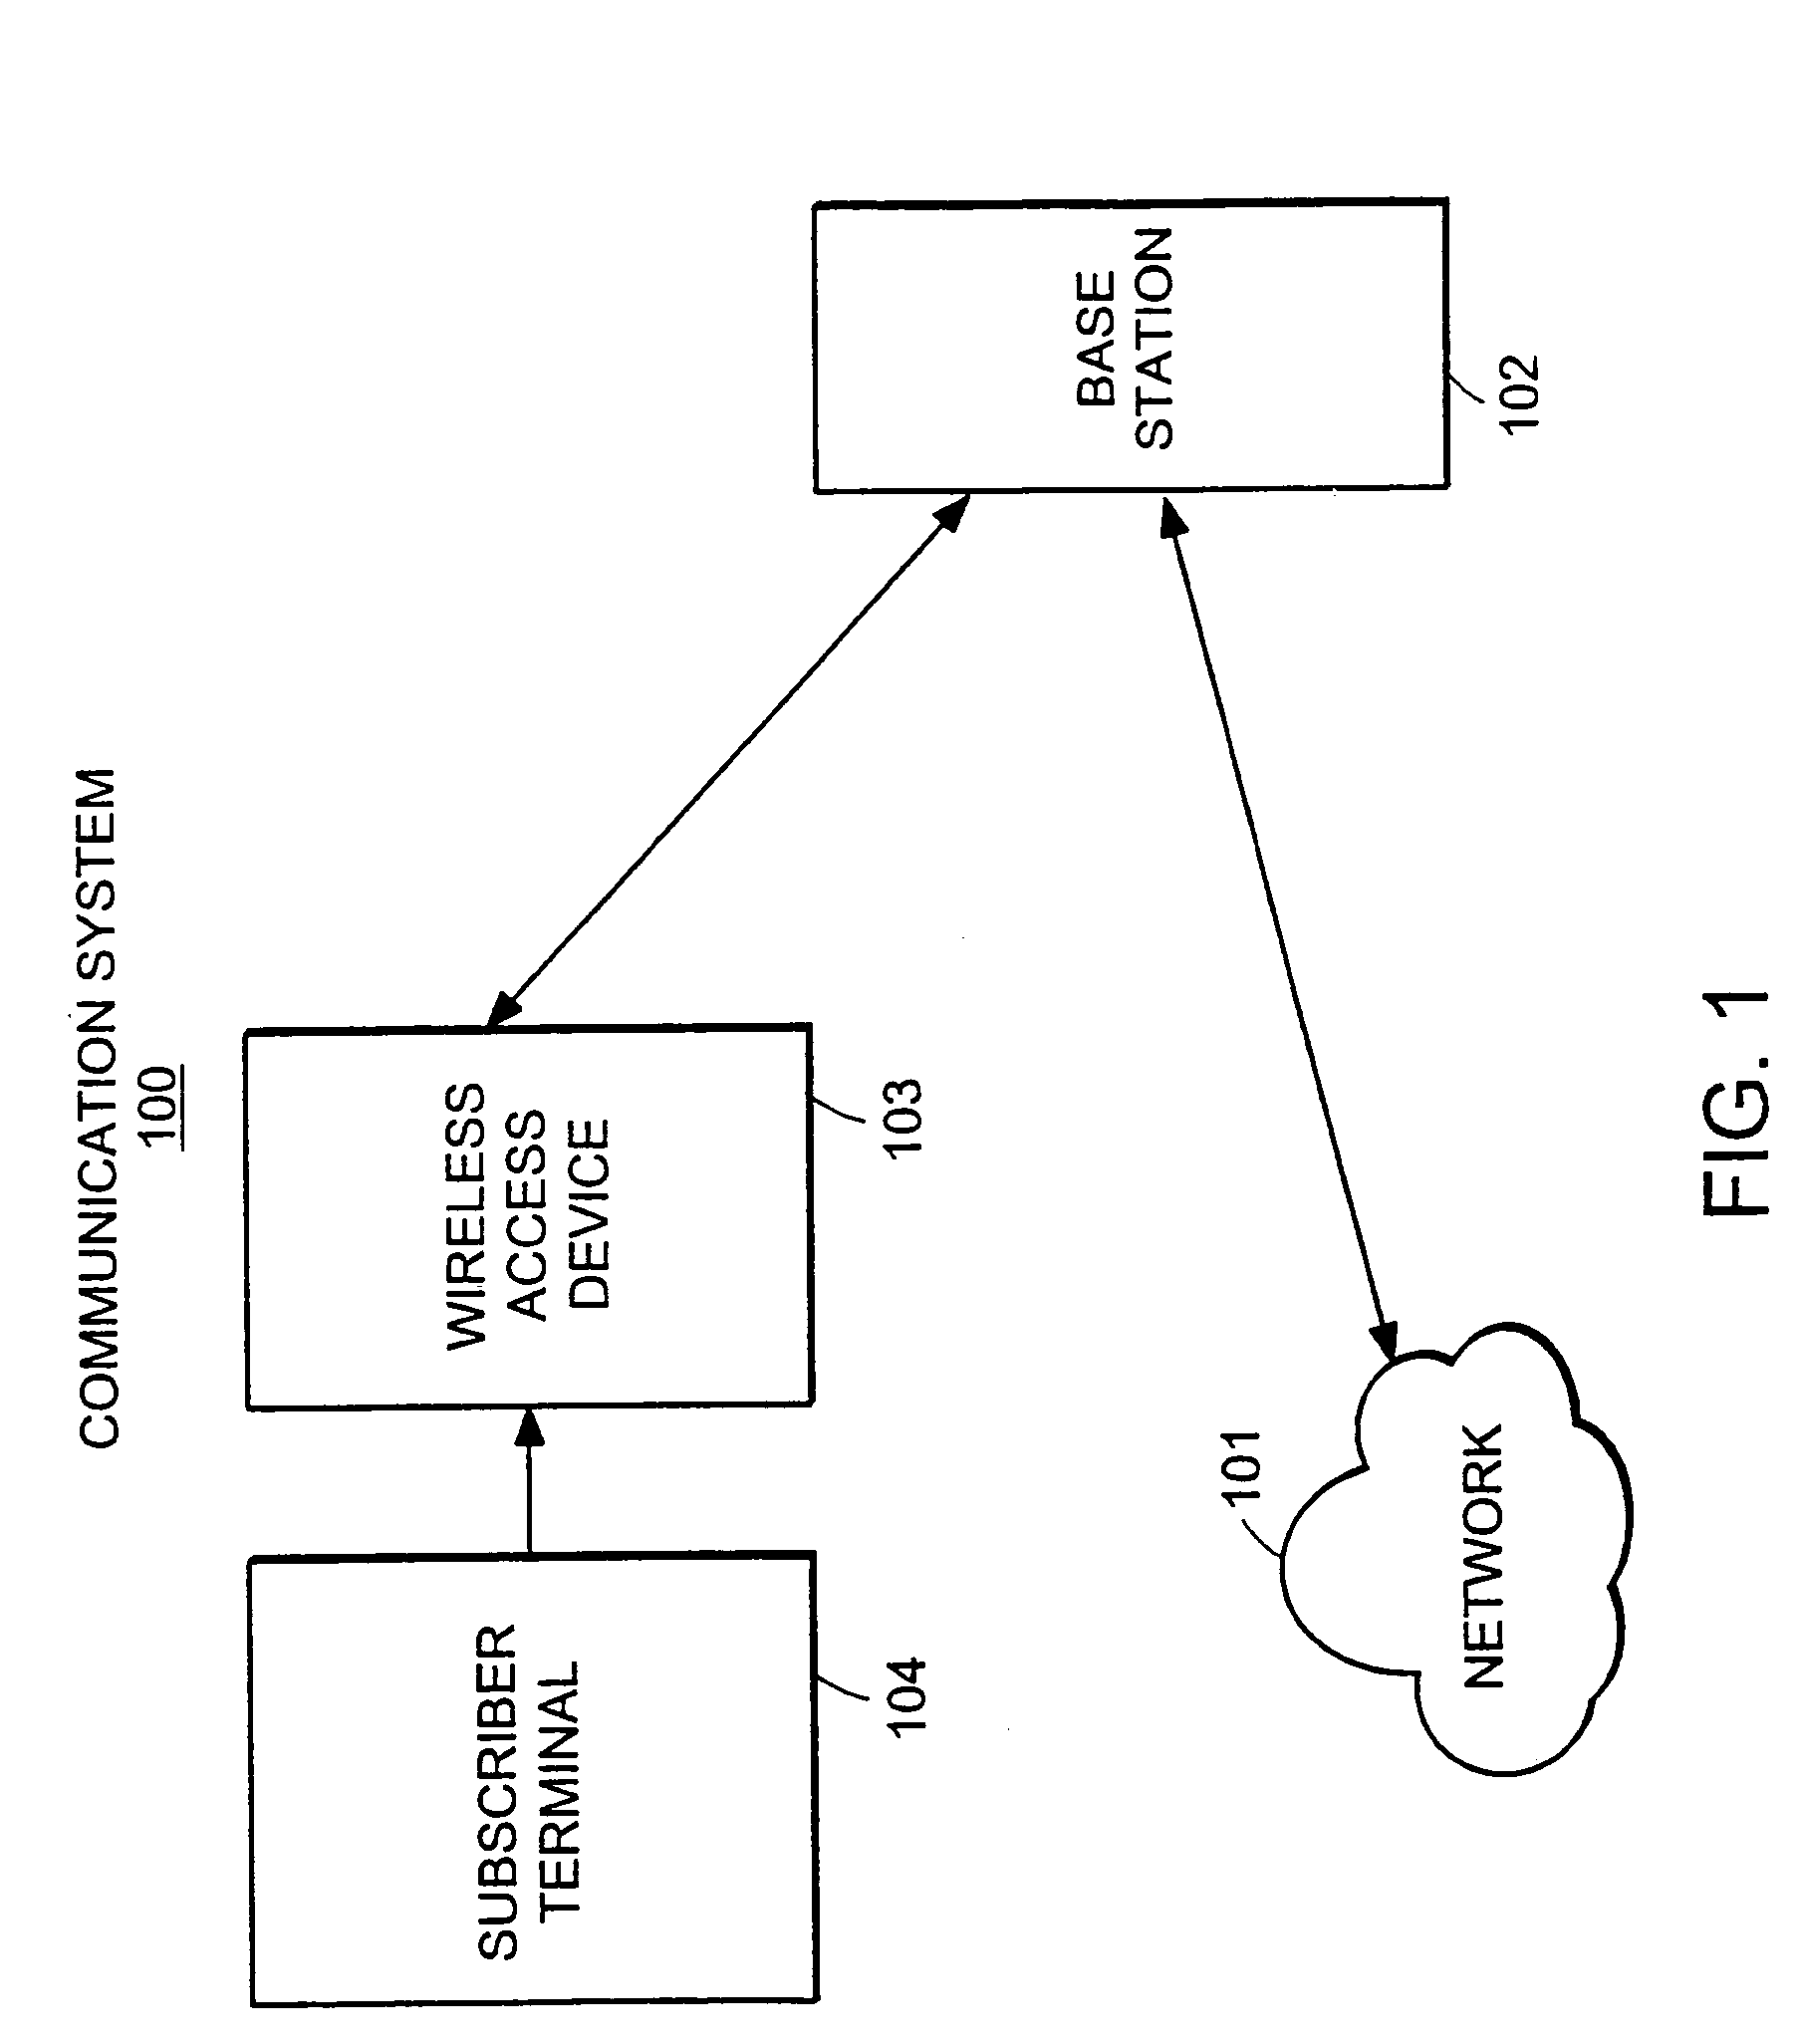 Maintenance of channel usage in a wireless communication system